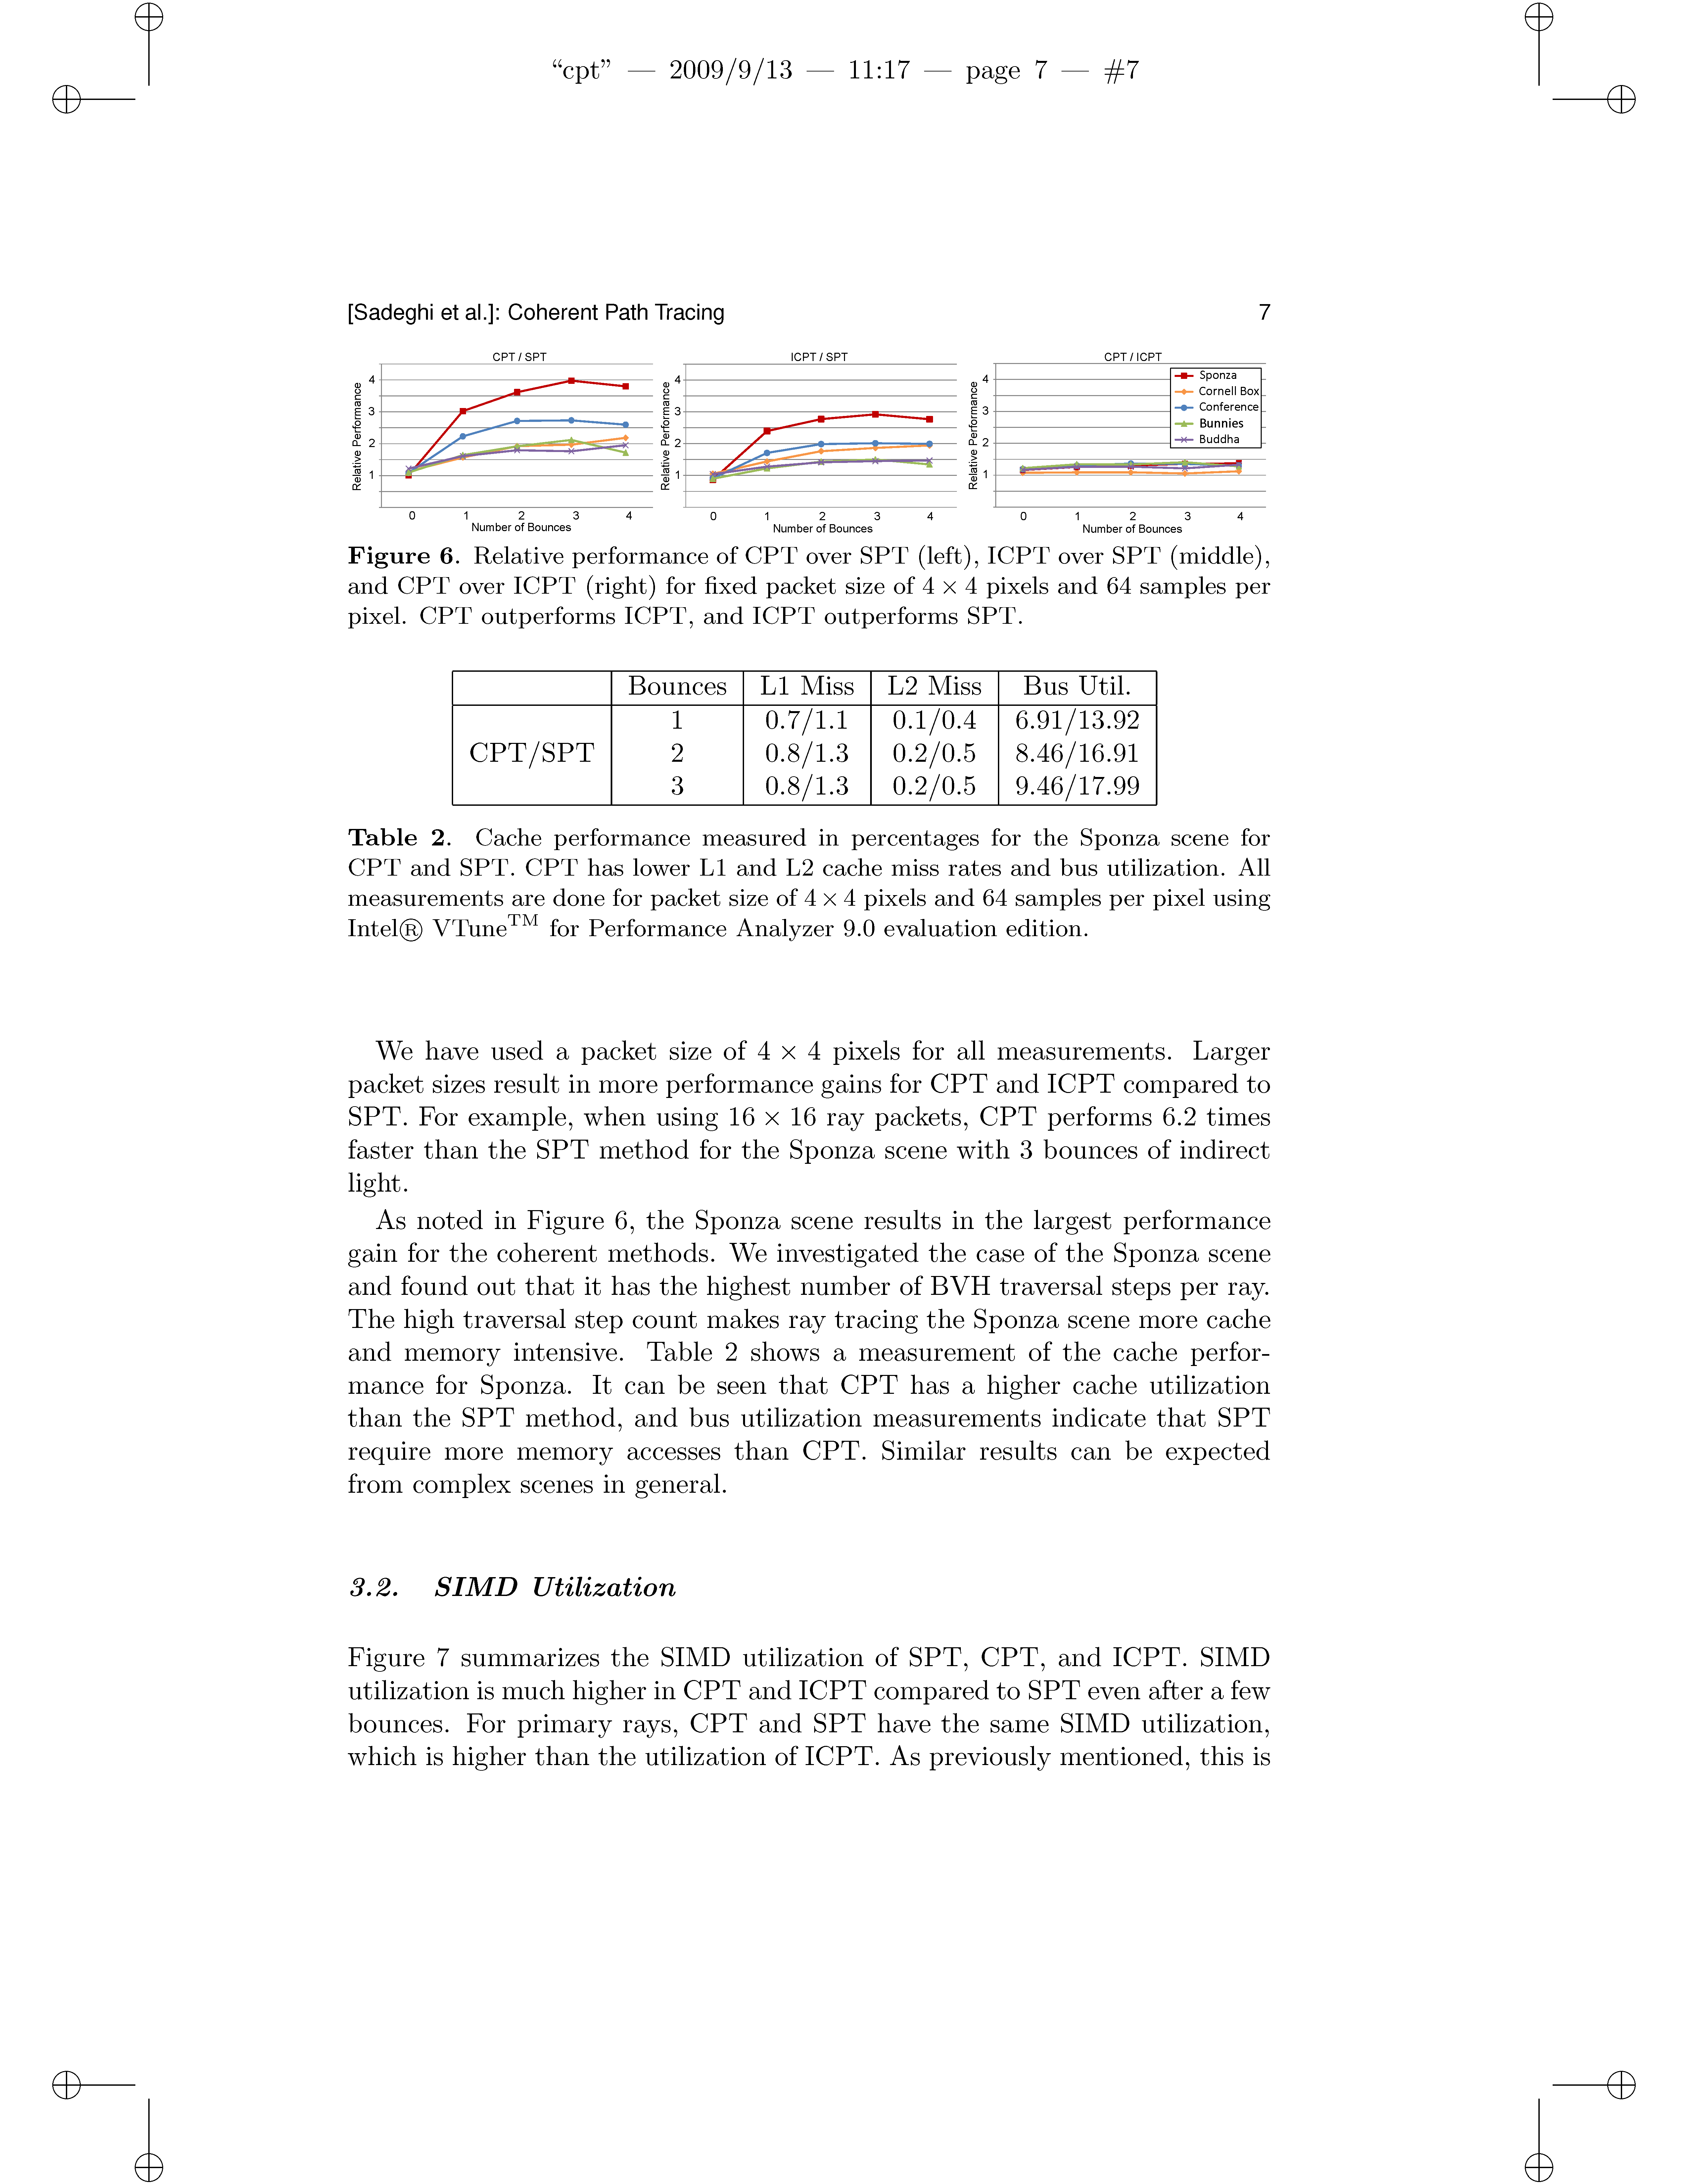 Coherent Path Tracing Page 7